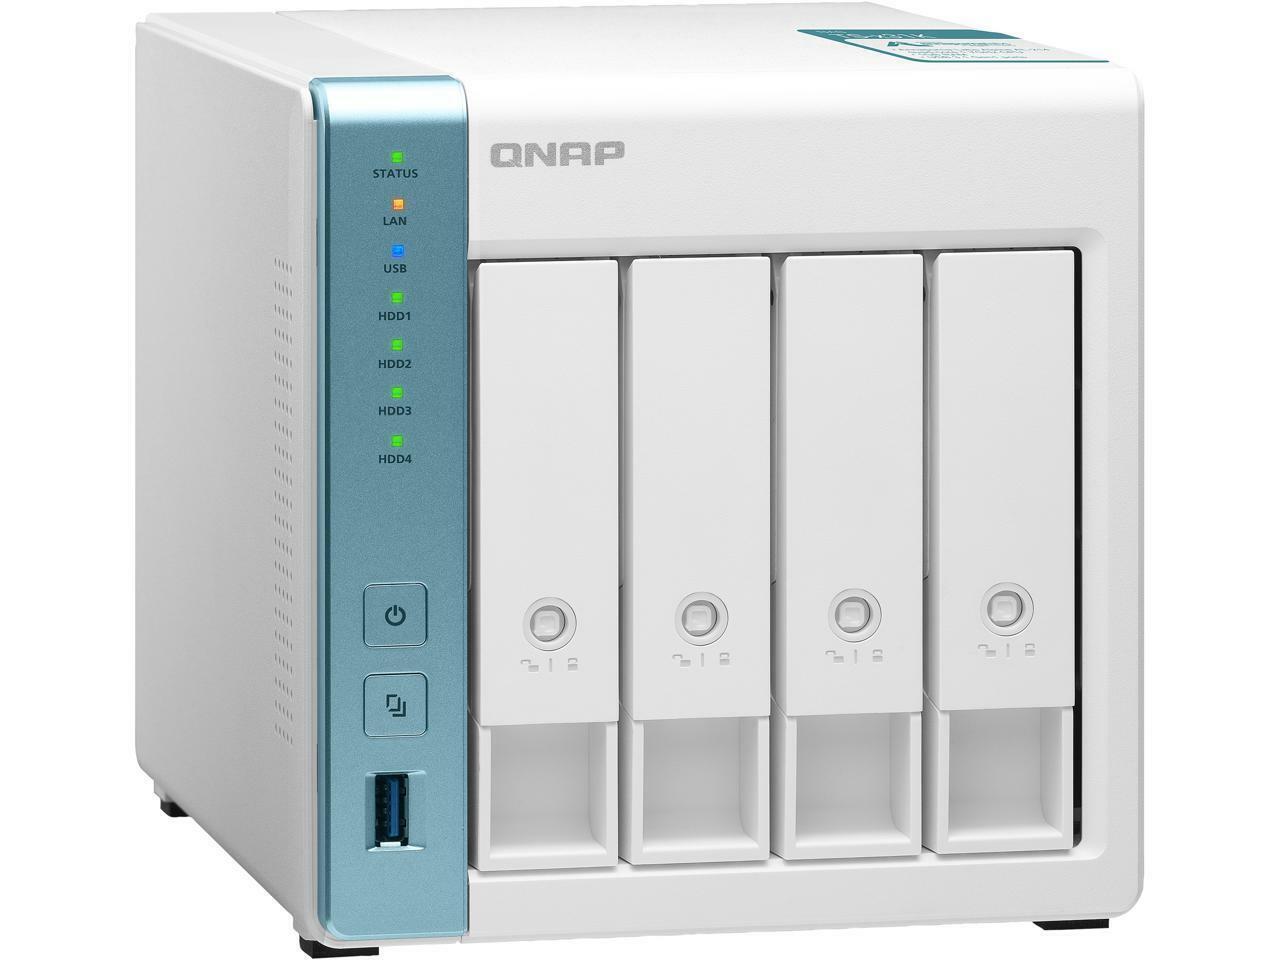 QNAP 4-Bay Personal Cloud NAS for Backup and Data Sharing 4-core 1.7GHz 1GB RAM